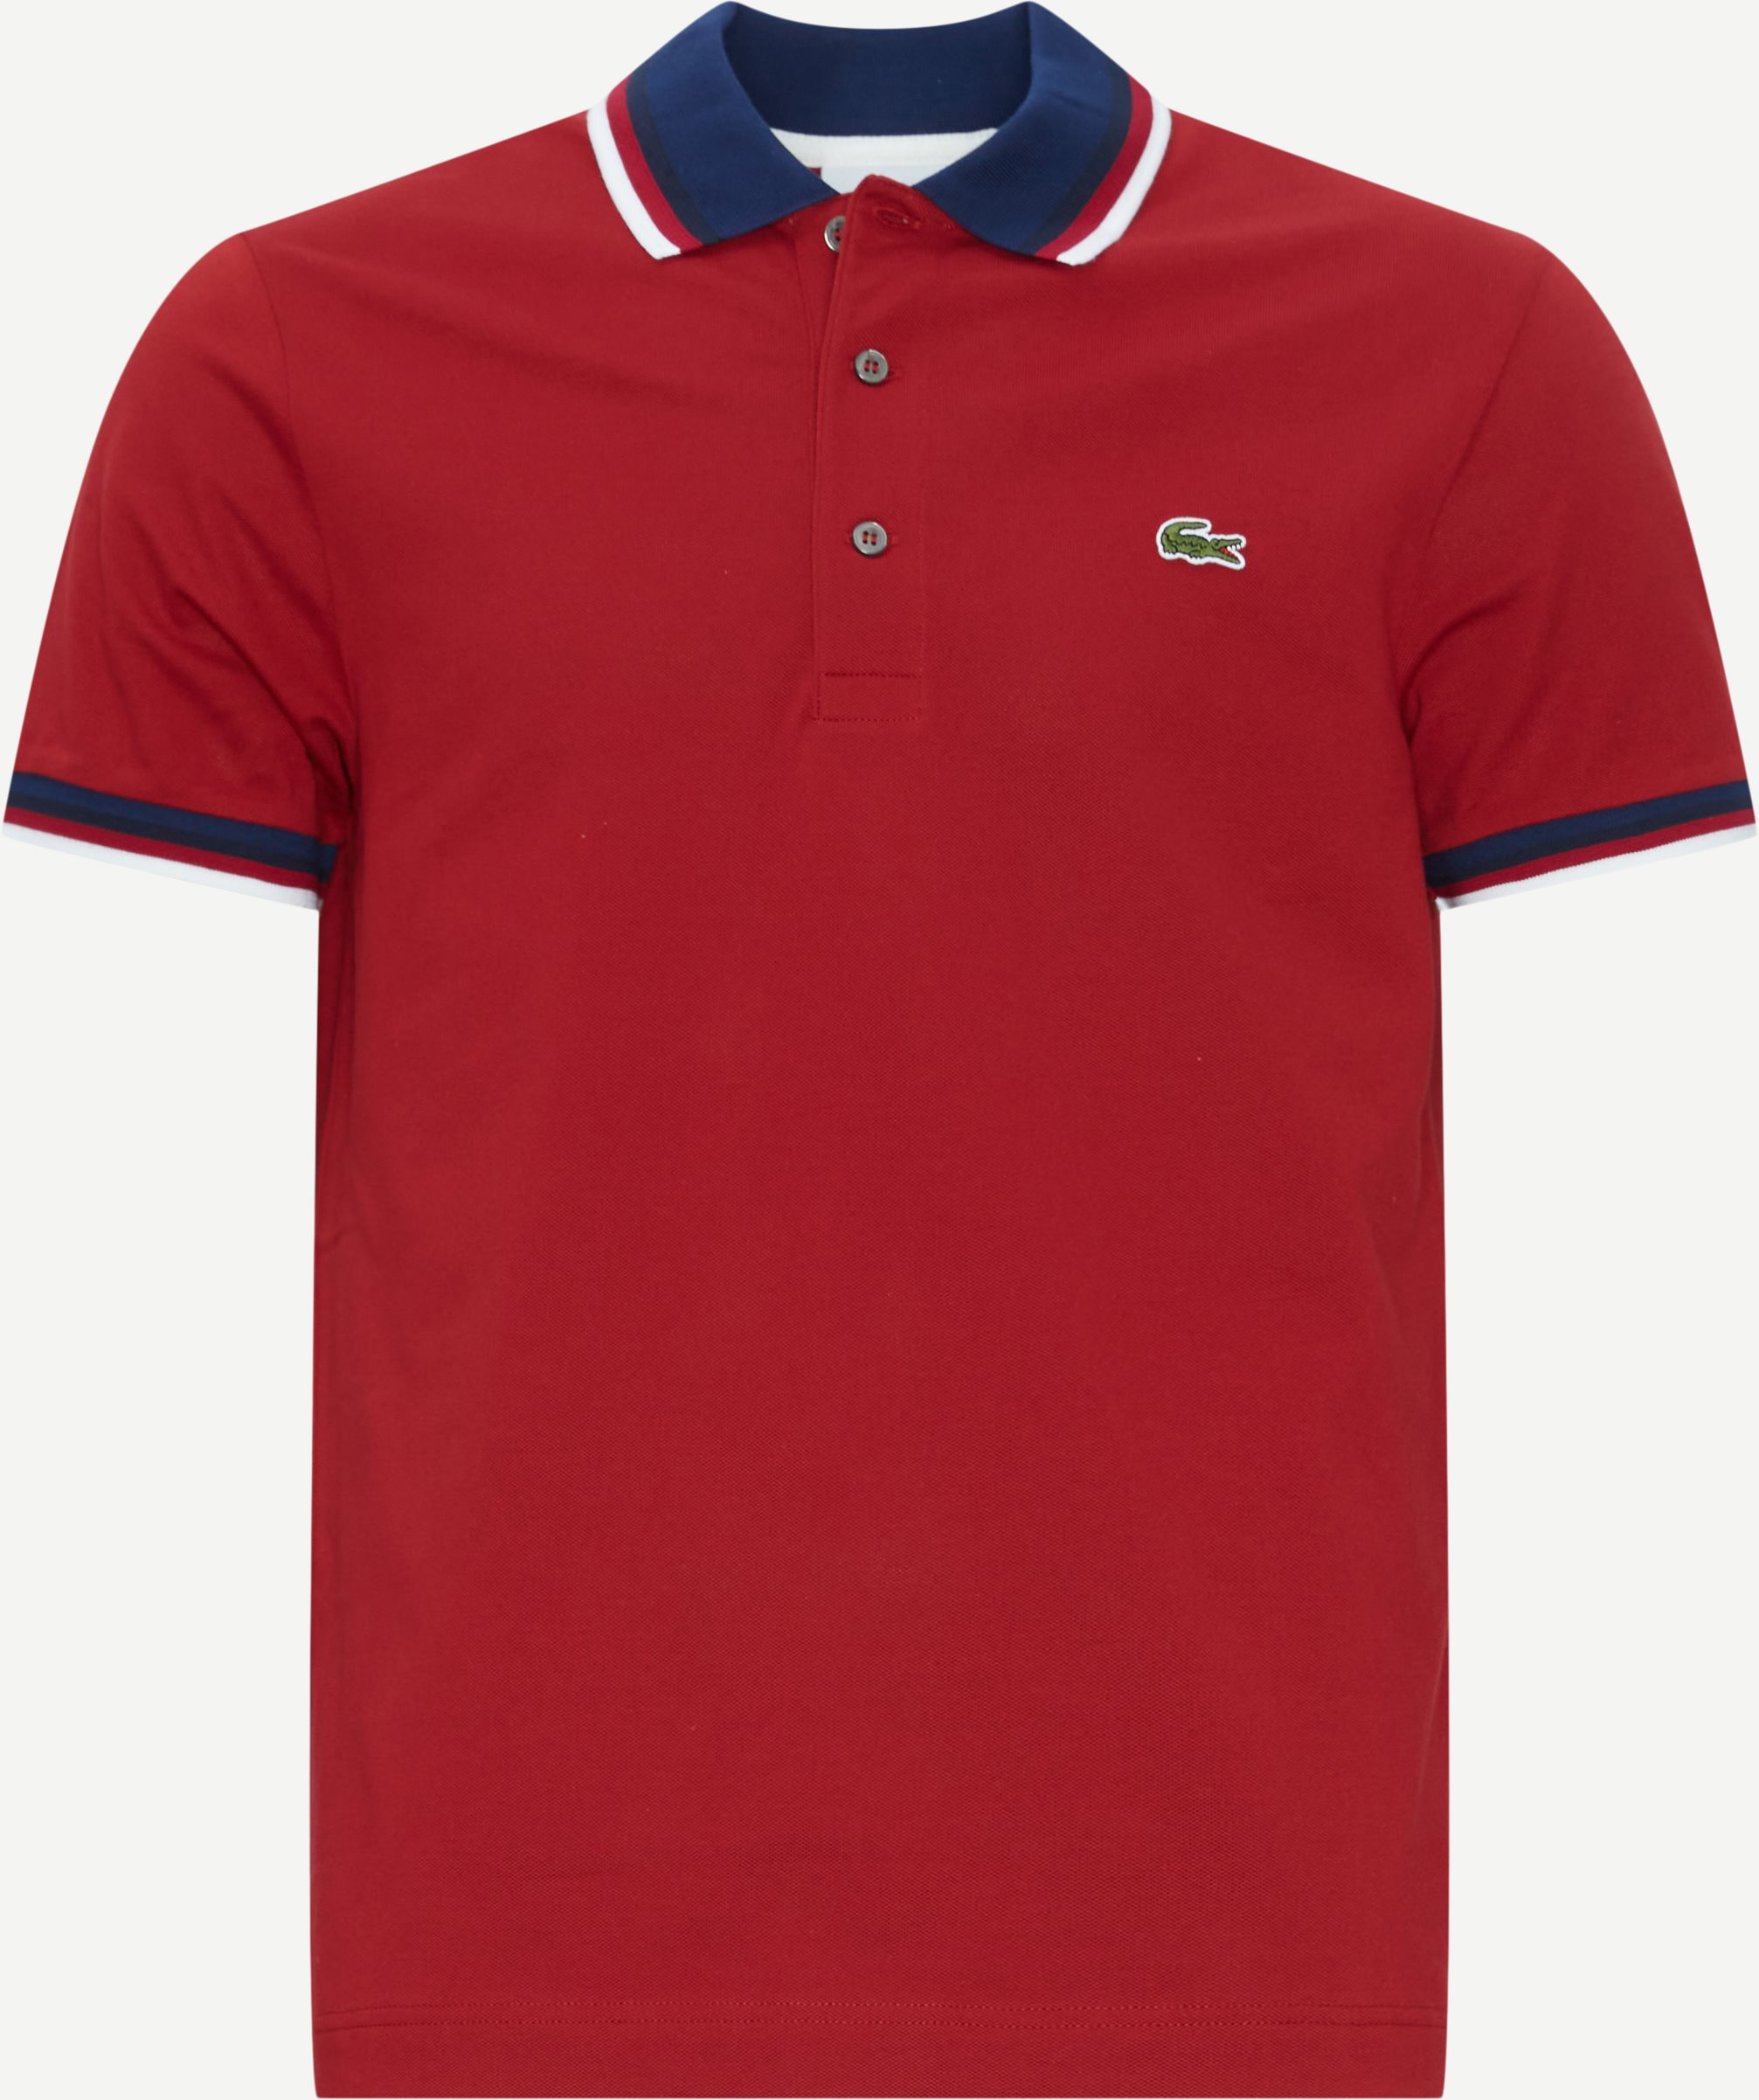 Lacoste T-shirts PH3461 Red